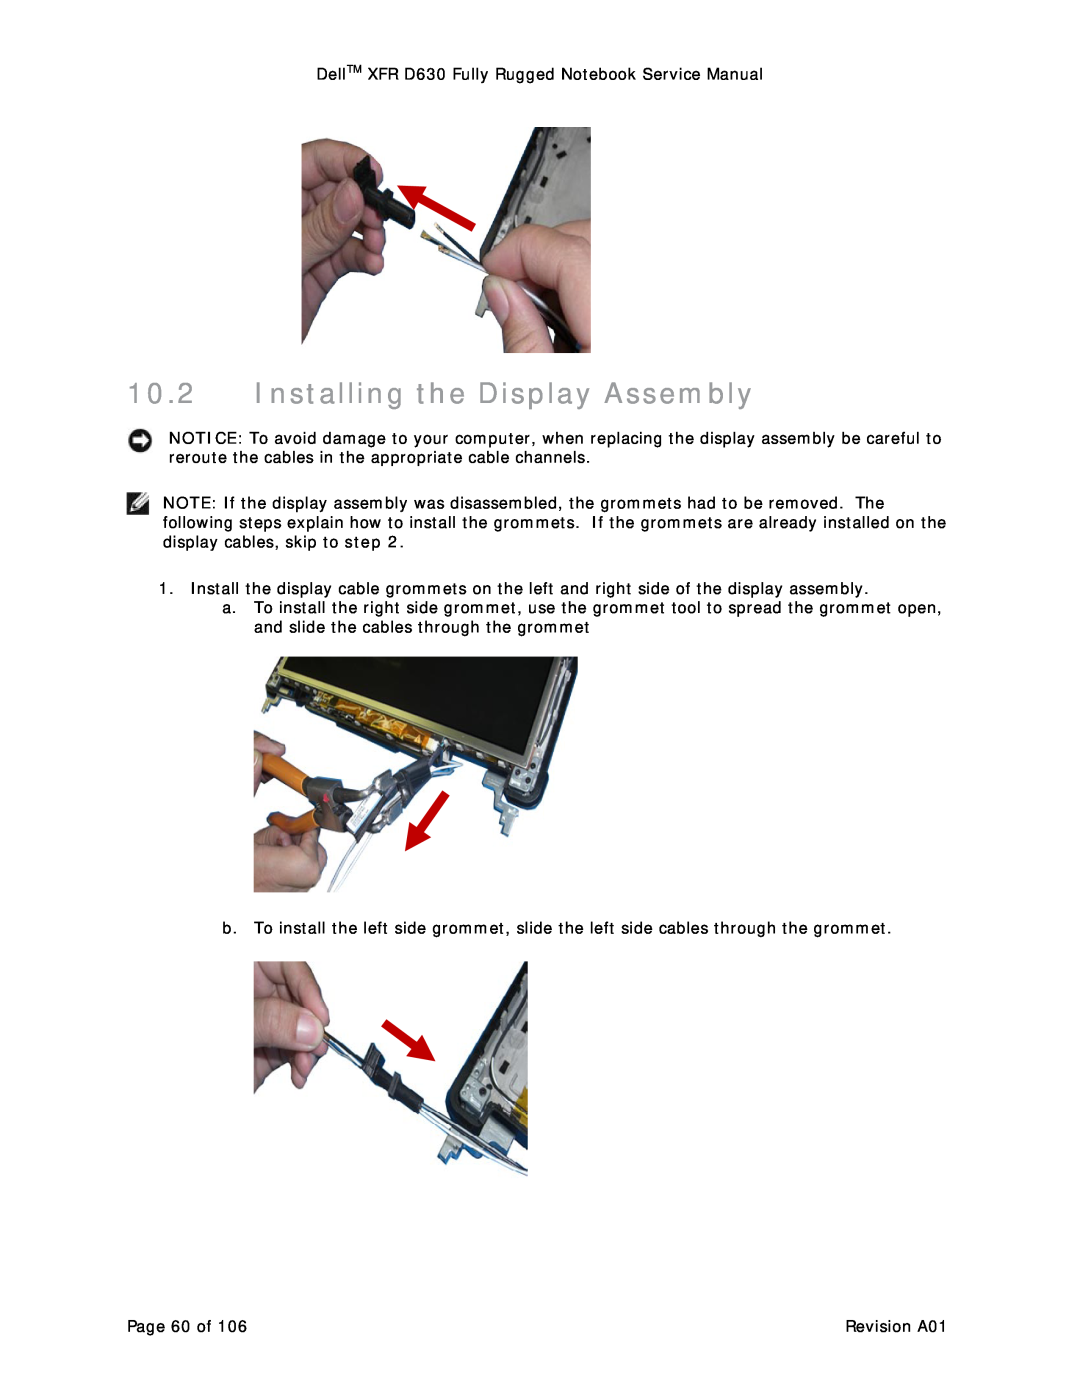 Dell D630 service manual Installing the Display Assembly 